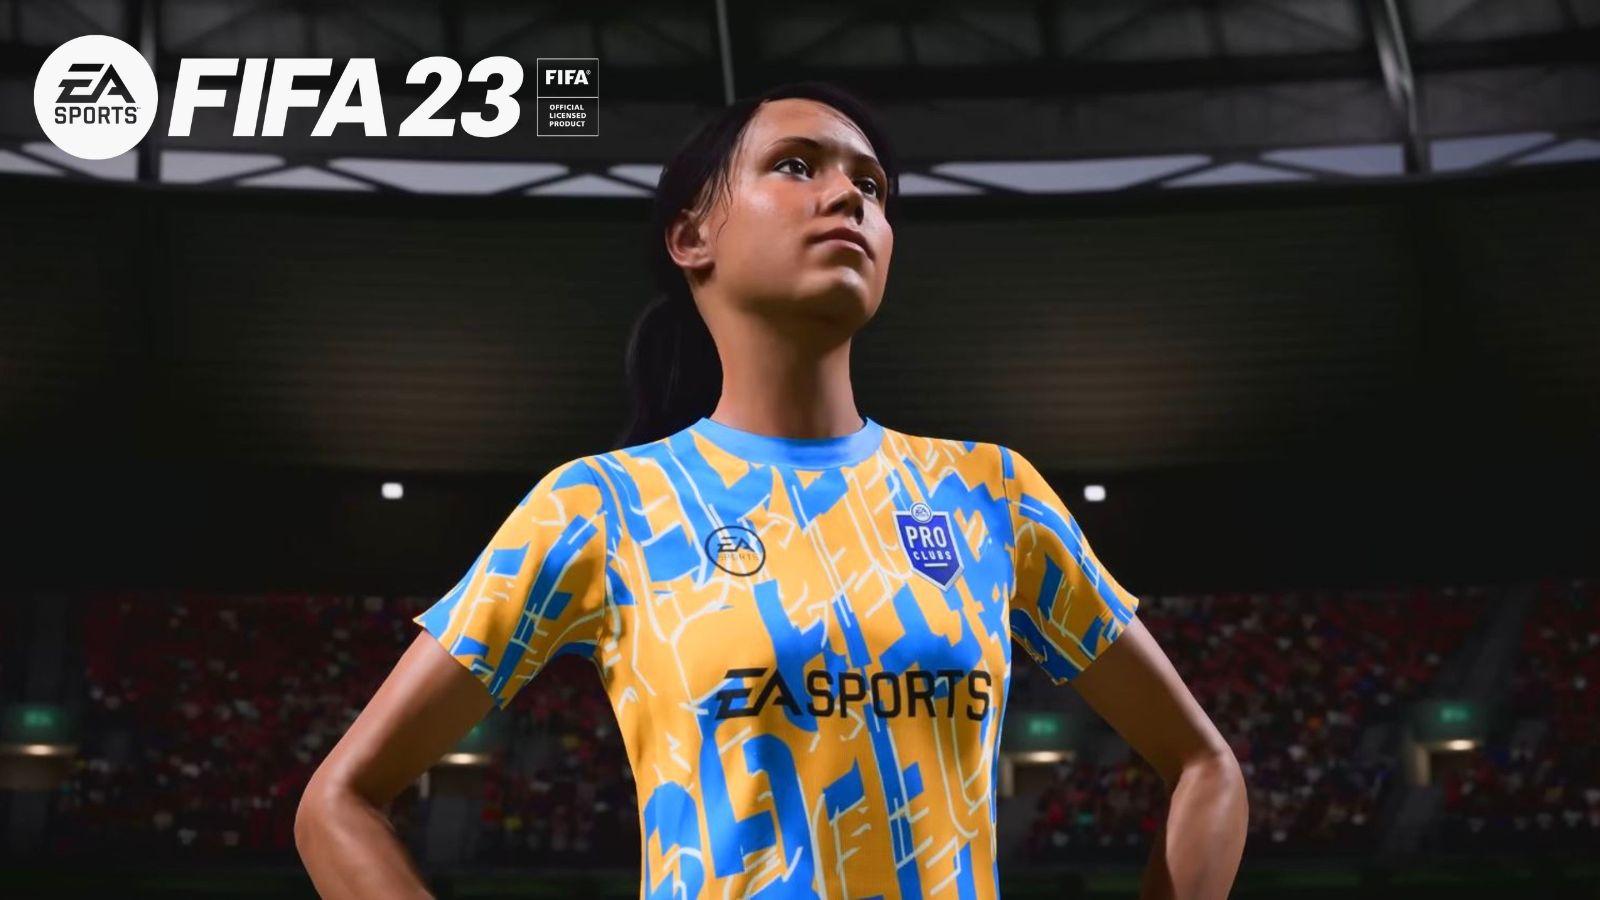 FIFA 23 Pro Clubs player